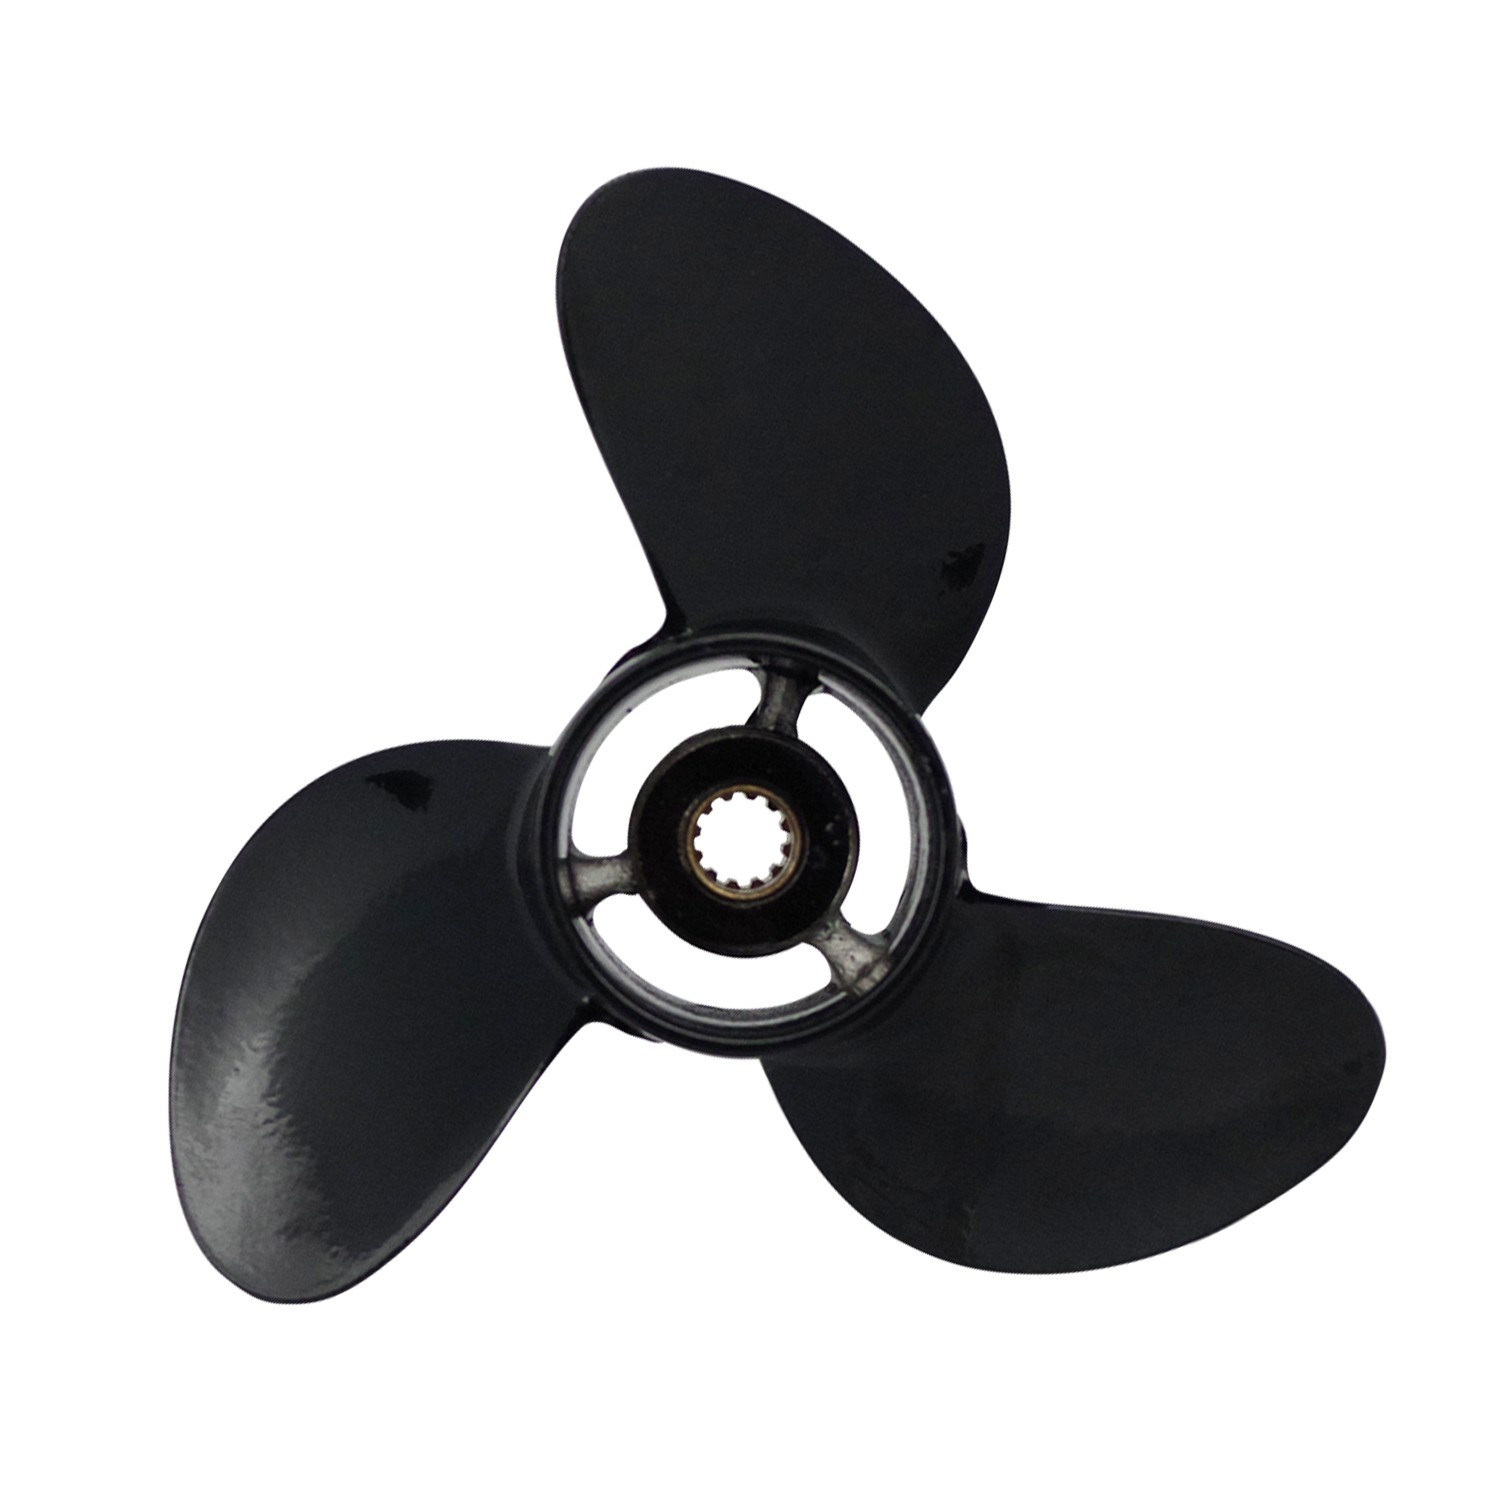 For Tohatsu Nissan Mercury 4-6HP Replacement Aluminum Outboard Propeller 7.8" 